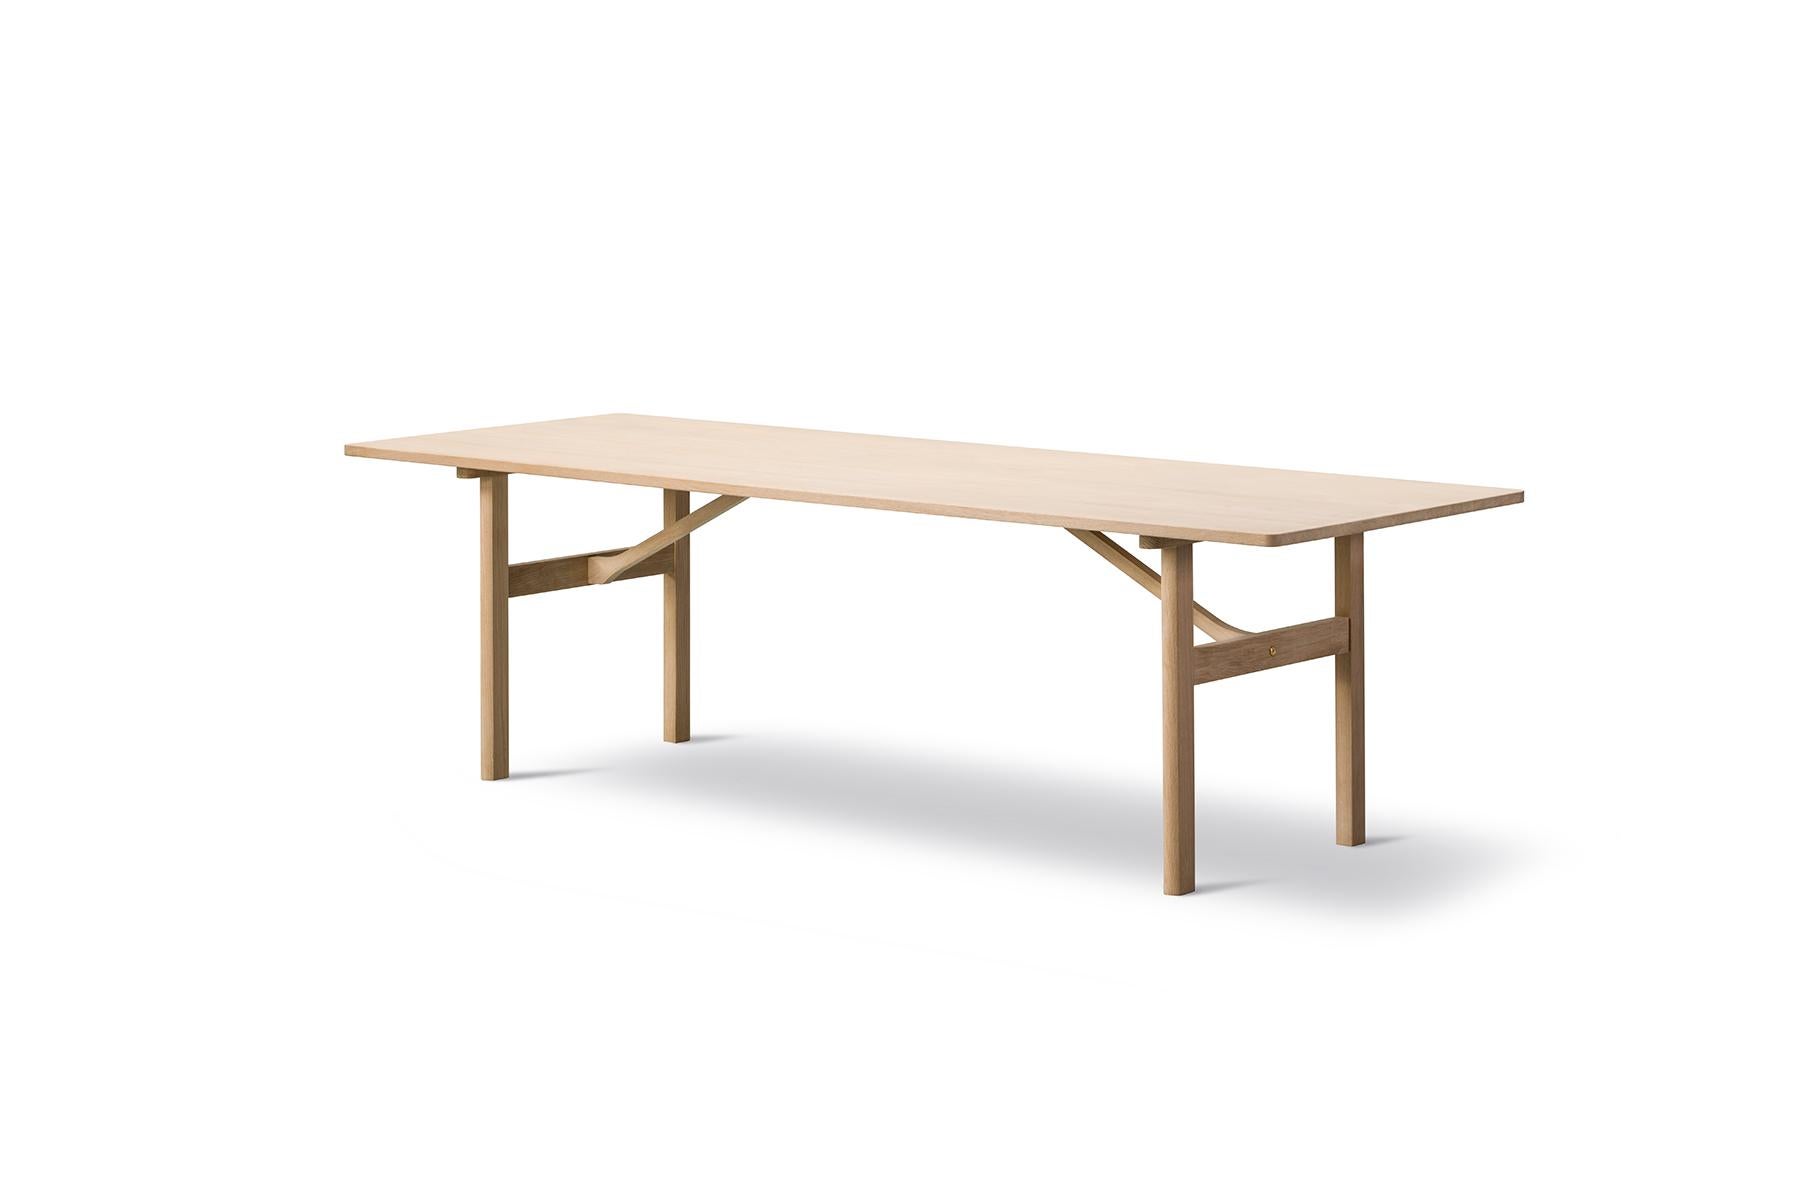 Børge Mogensen Model 6384 dining table designed in 1958, this dining table is constructed from the finest selection of solid oak. Also available with additional plates extending the tabletop by 40 cm at each end.